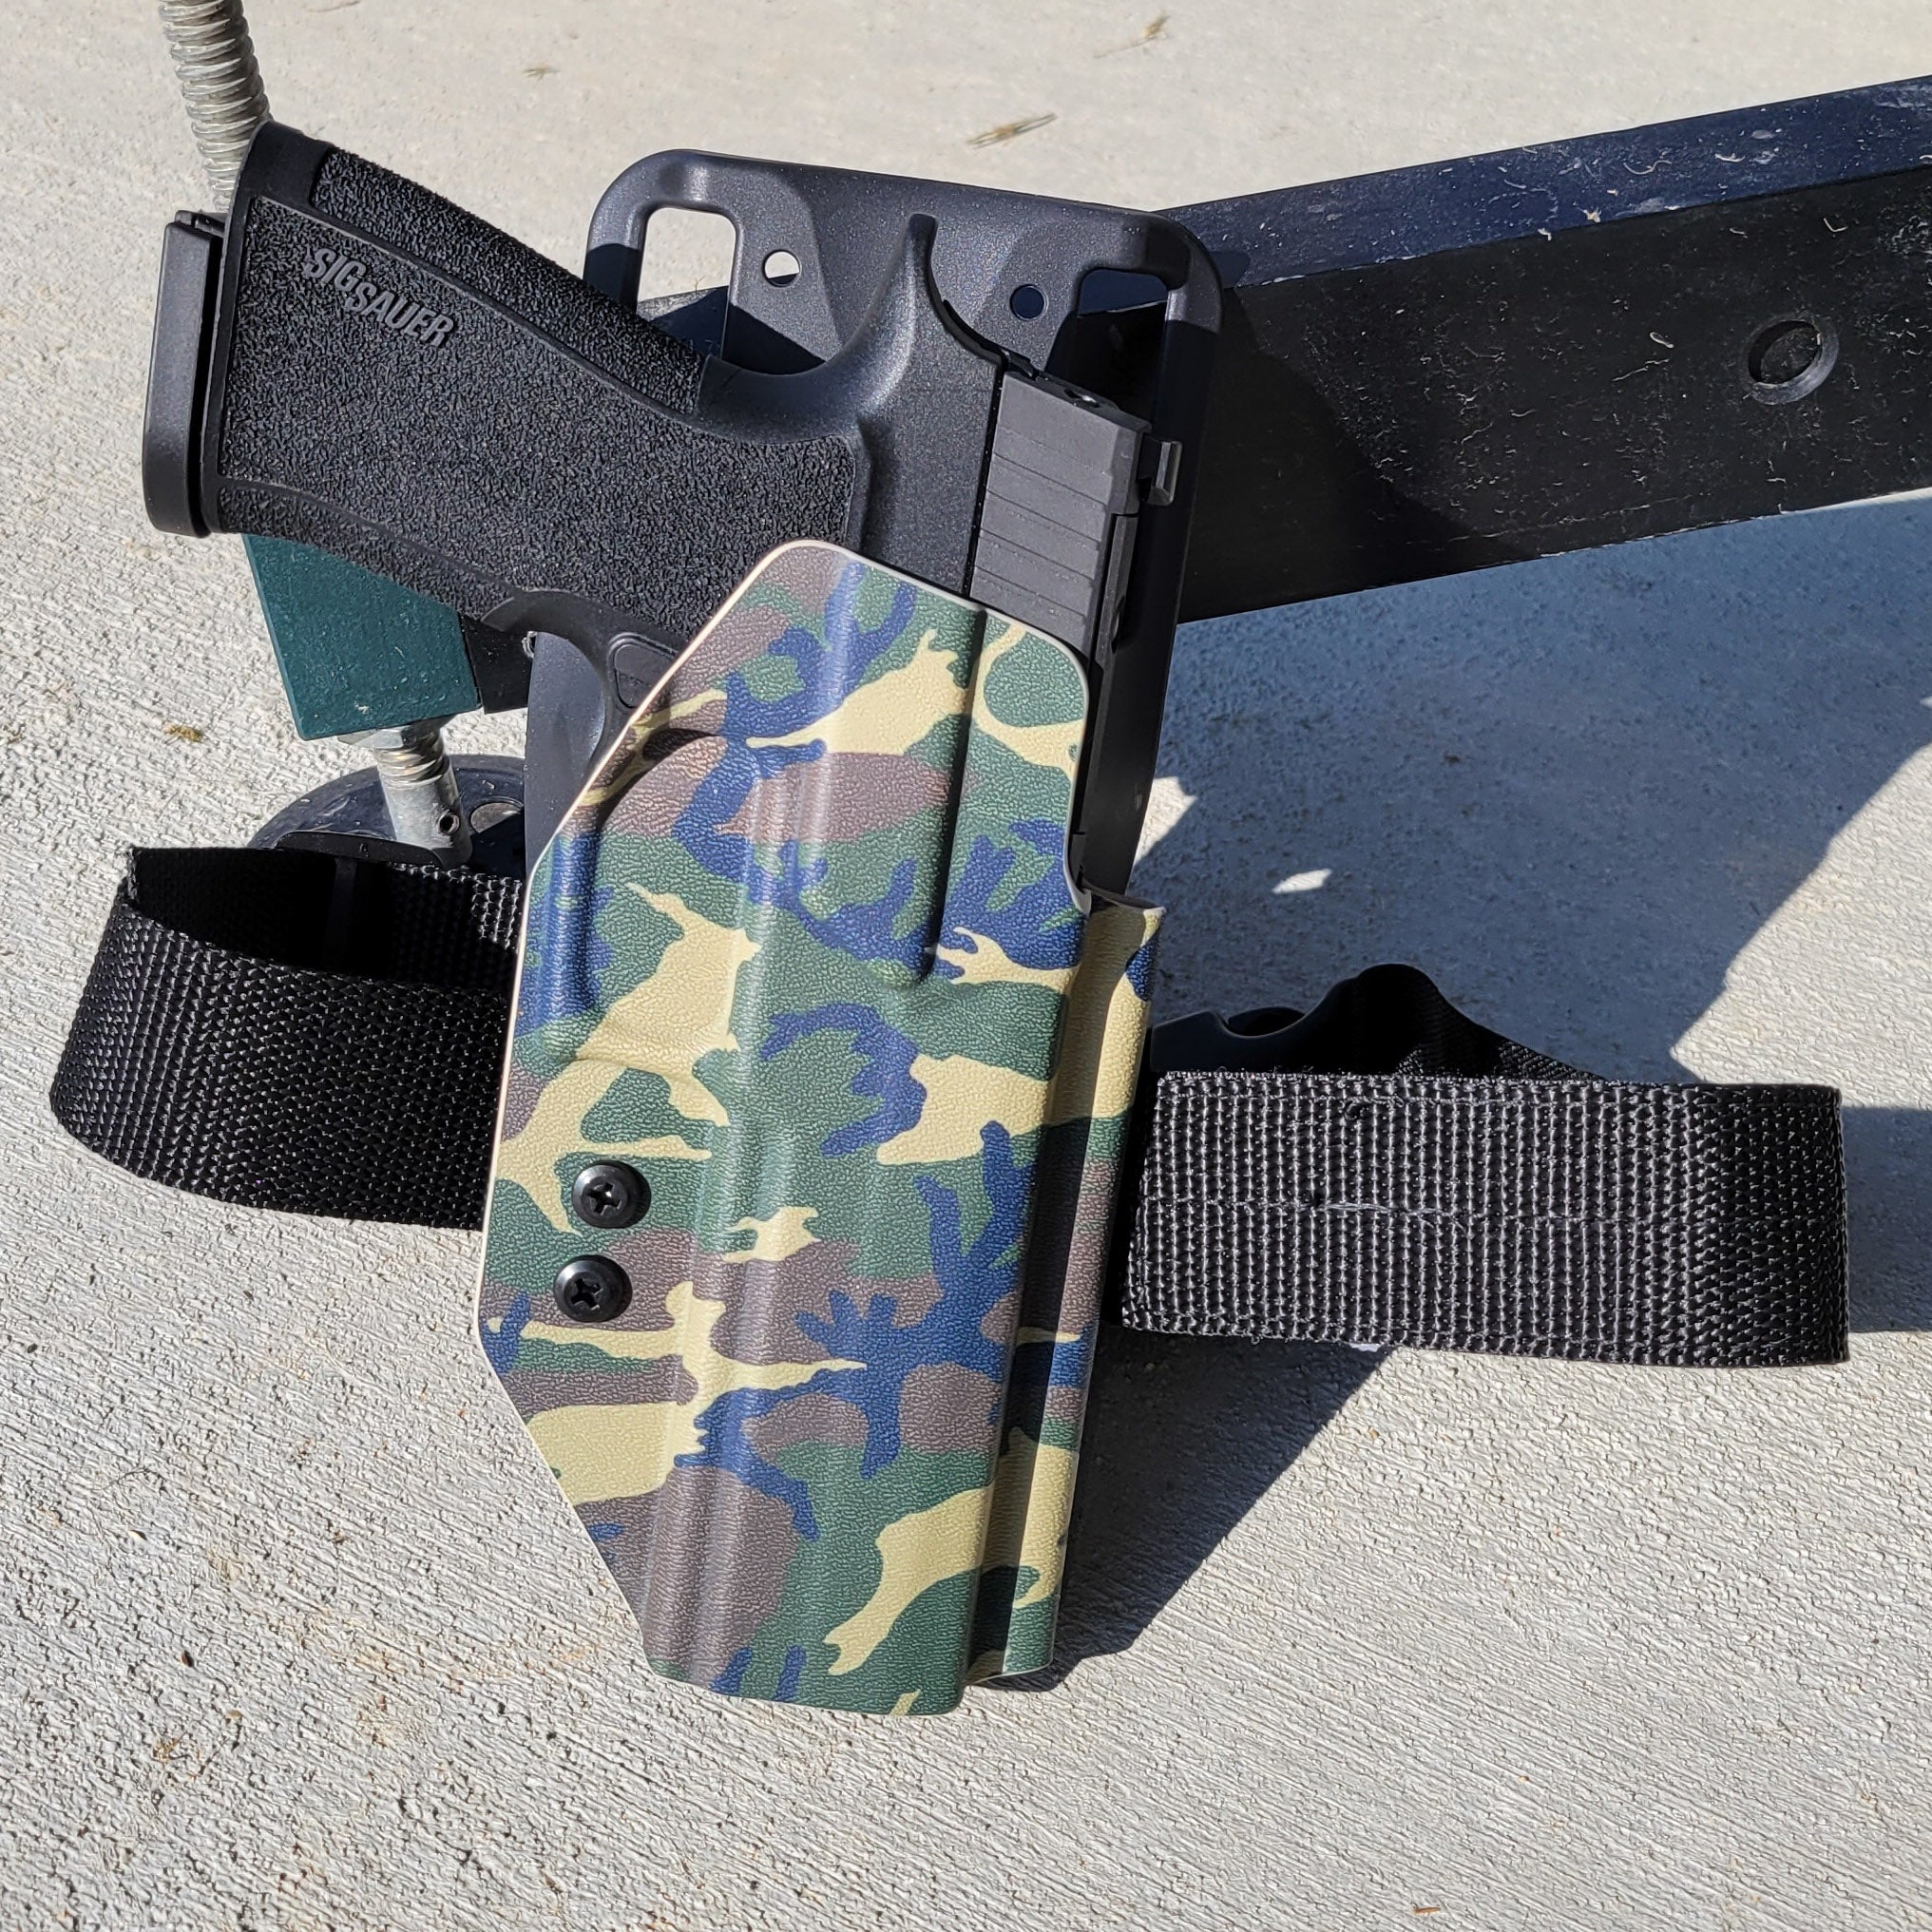 Outside Waistband Kydex Duty, Hunting, and Competition Style Kydex Holster designed to fit the Sig Sauer P320-XTEN 10MM pistol. Open Muzzle, Full Sweat Guard, Adjustable Retention. Profile cut for red dot sights and optics on the pistol. Made in the USA. 10 for the Win! P 320 XTen X Ten X10 X 10 10MM